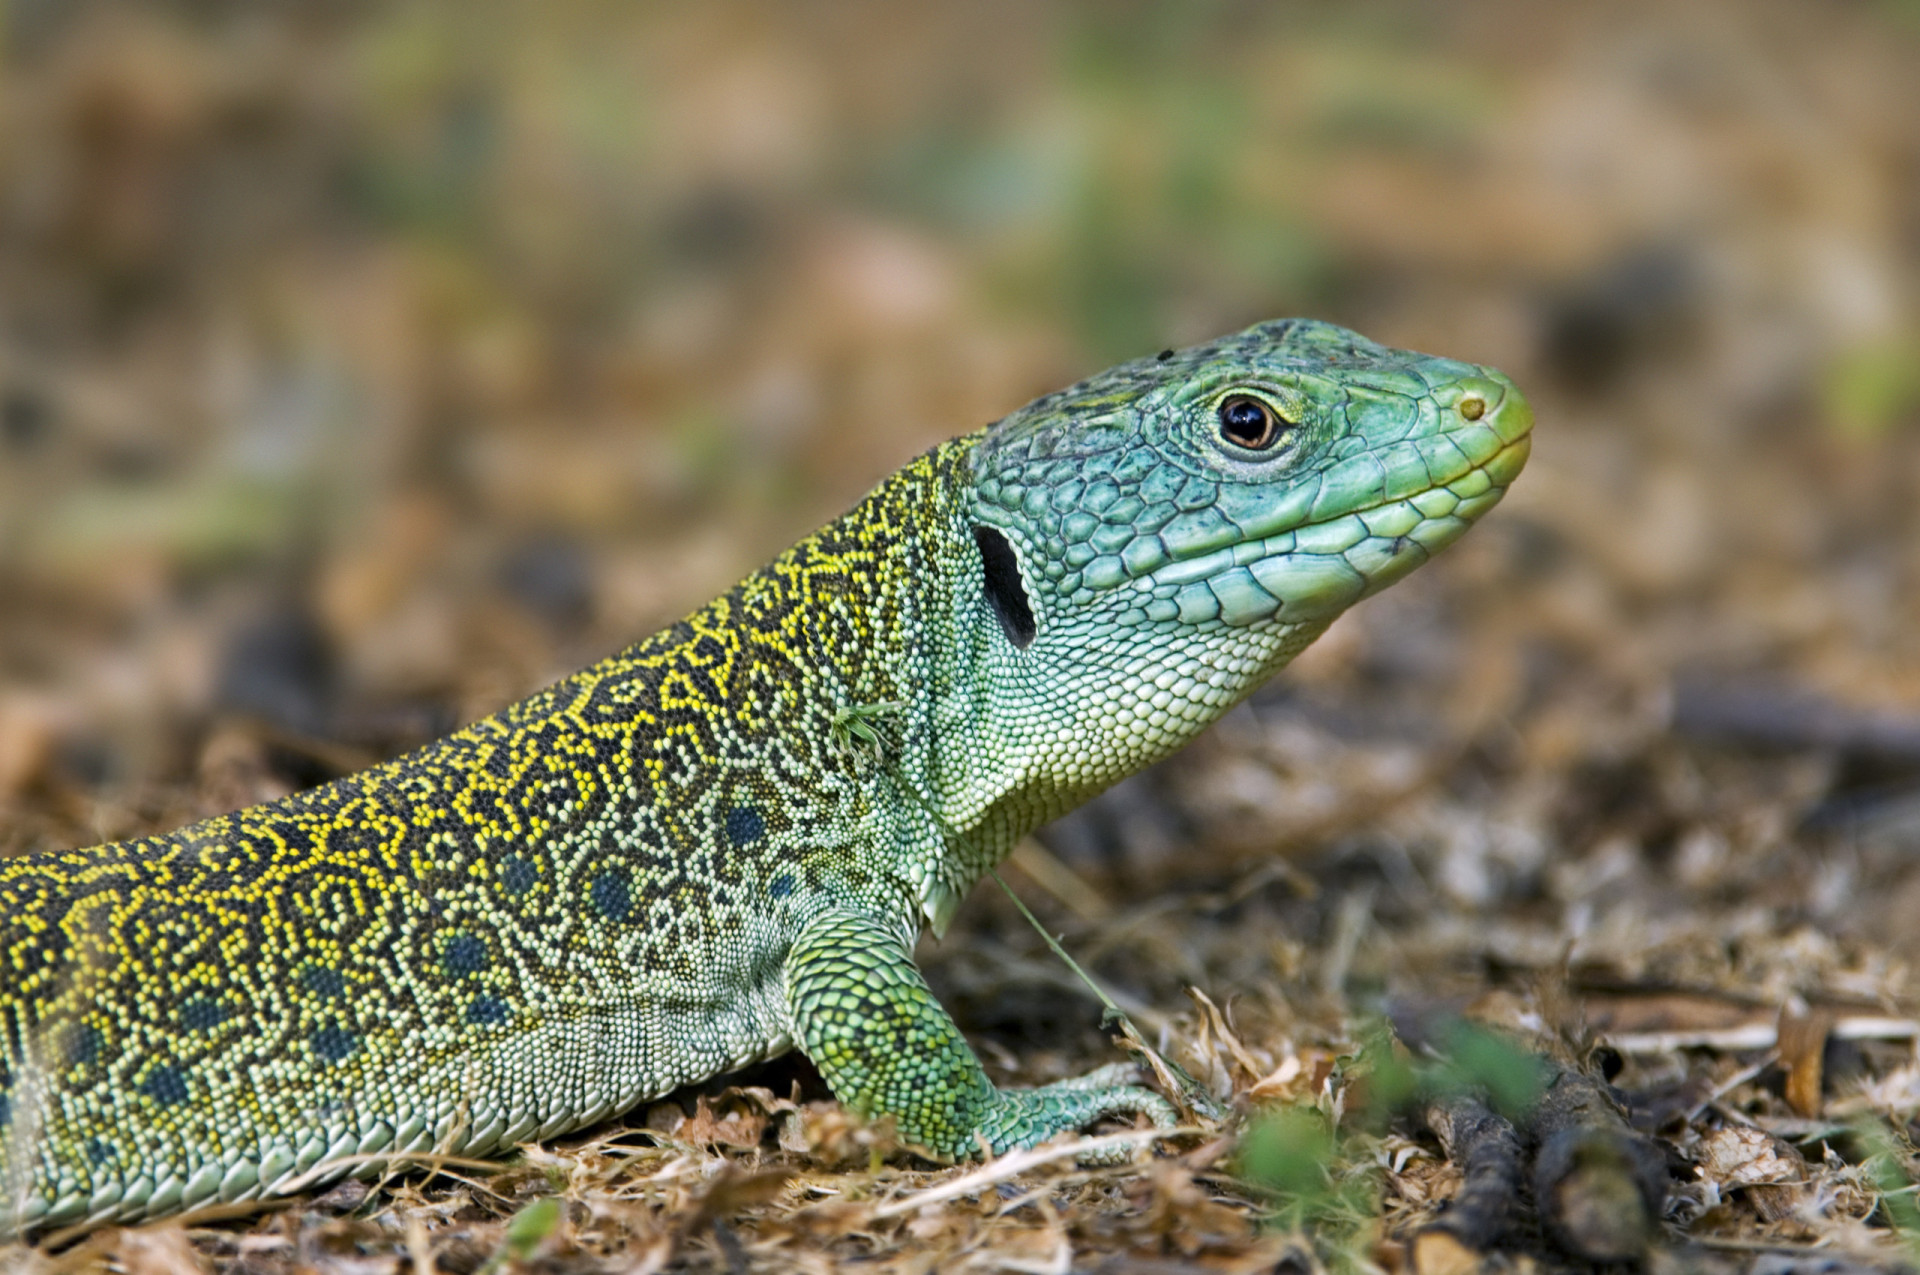 <p>A species endemic to southwestern Europe, the ocellated lizard can sometimes be observed basking on rocks under a hot Tabernas sun. But only occasionally. The International Union for Conservation of Nature (IUCN) has classified this creature as Near Threatened on the Red List, its numbers inexplicably in decline.</p><p><a href="https://www.msn.com/en-us/community/channel/vid-7xx8mnucu55yw63we9va2gwr7uihbxwc68fxqp25x6tg4ftibpra?cvid=94631541bc0f4f89bfd59158d696ad7e">Follow us and access great exclusive content every day</a></p>